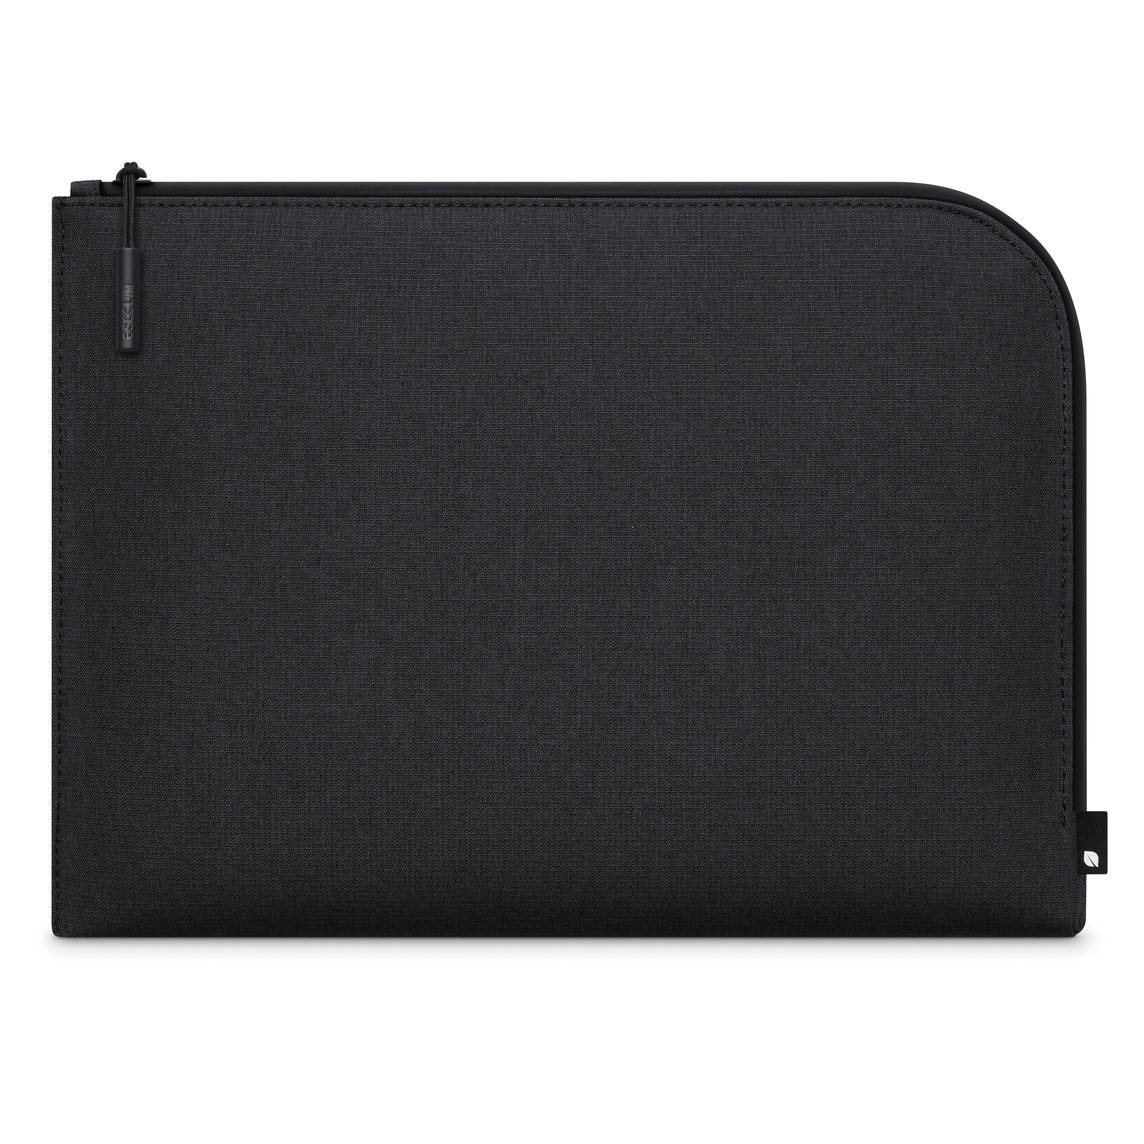 The Best M2 MacBook Air Protective Sleeves | by Justin Beaudrie